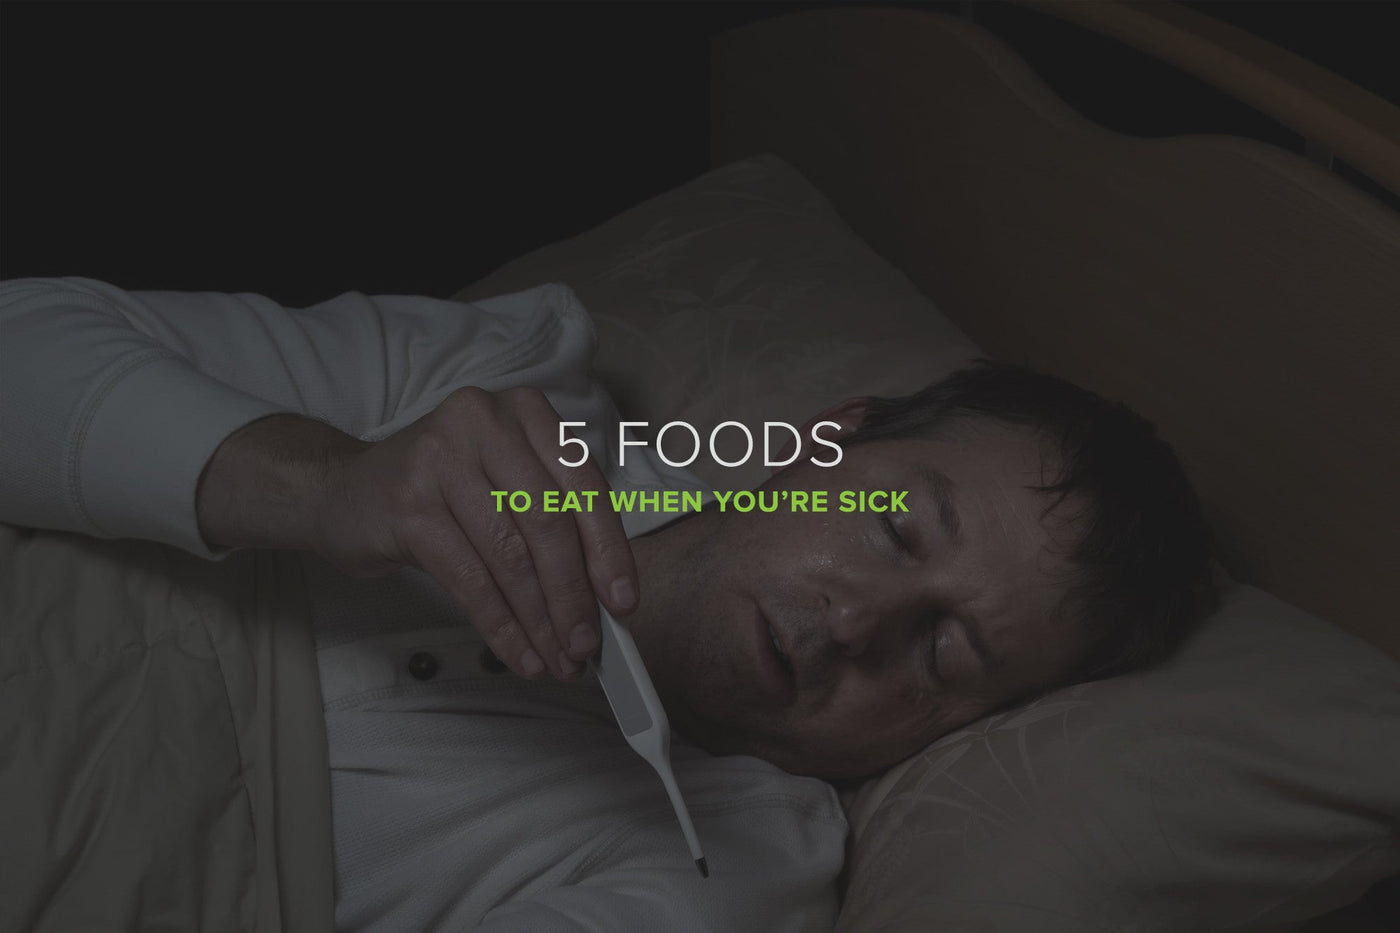 5 Foods to Eat When You're Sick - Organic Muscle Fitness Supplements